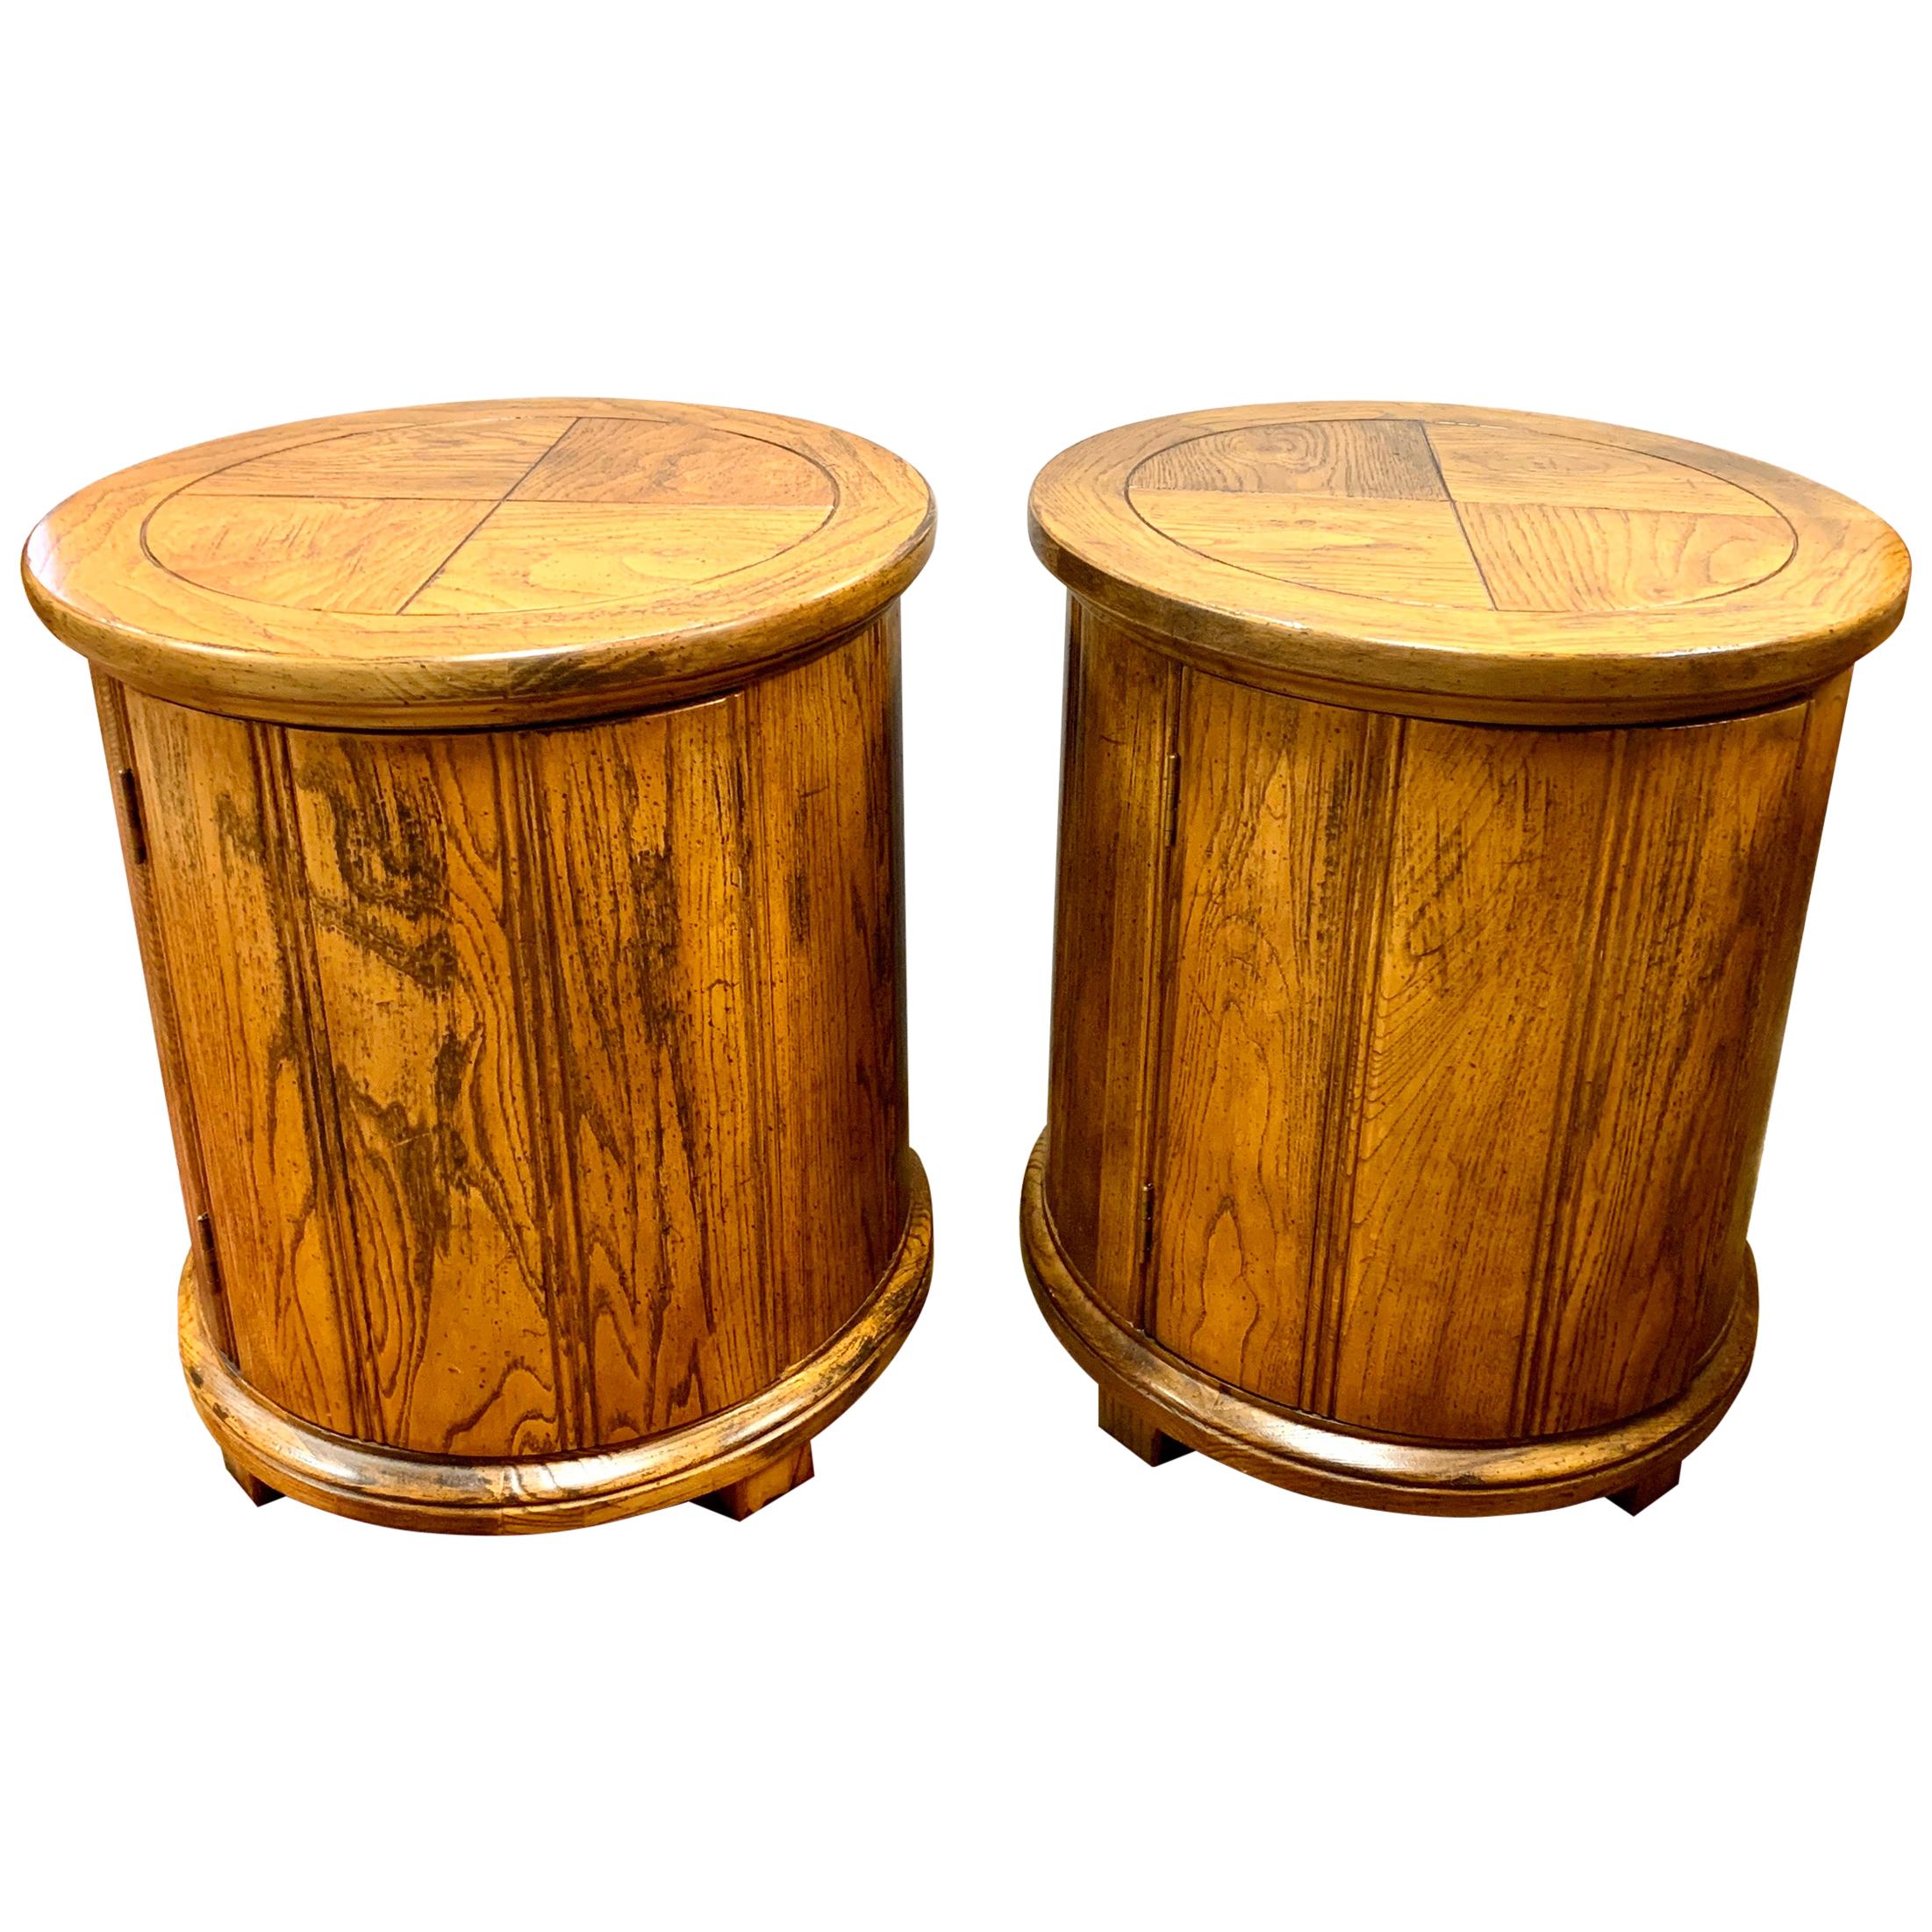 Round Solid Wood Drum Tables, Cabinets, Nightstands, Pair